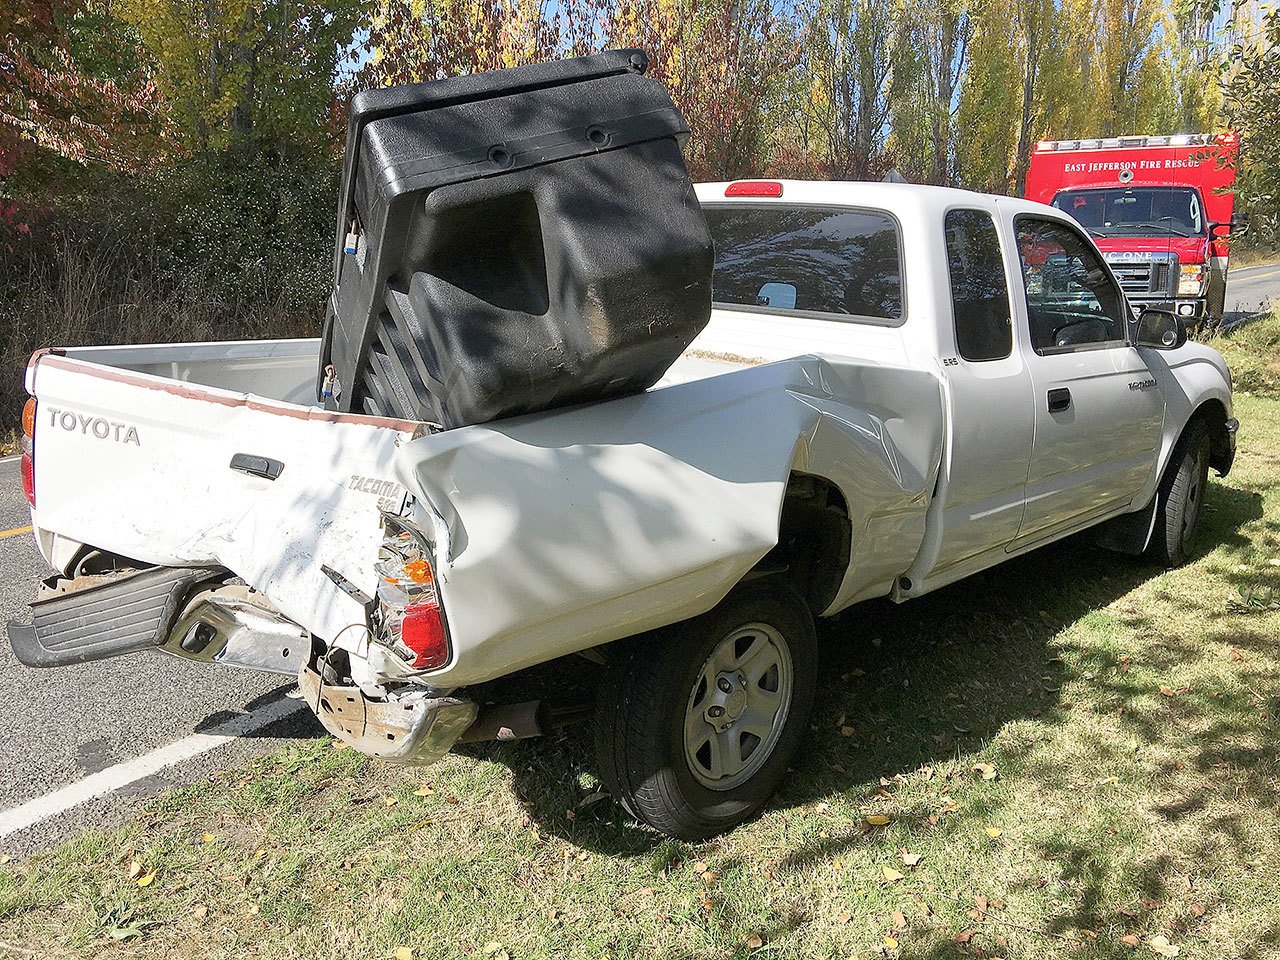 Bill Beezley/East Jefferson Fire-Rescue                                A Toyota Tacoma was rear-ended on South Discovery Road on Tuesday afternoon.